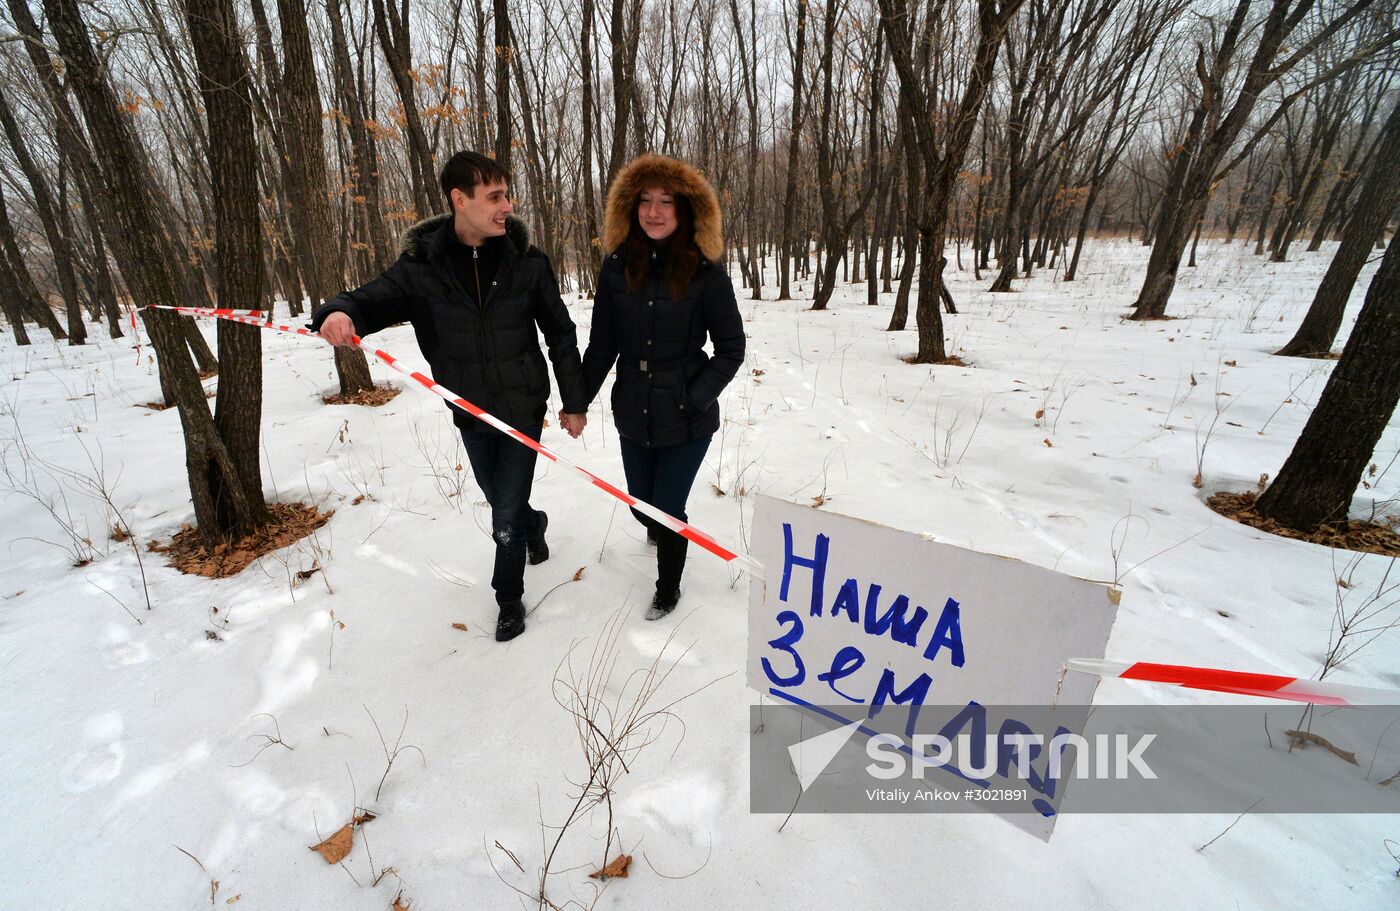 Distribution of land plots in Russia’s Far East gets underway